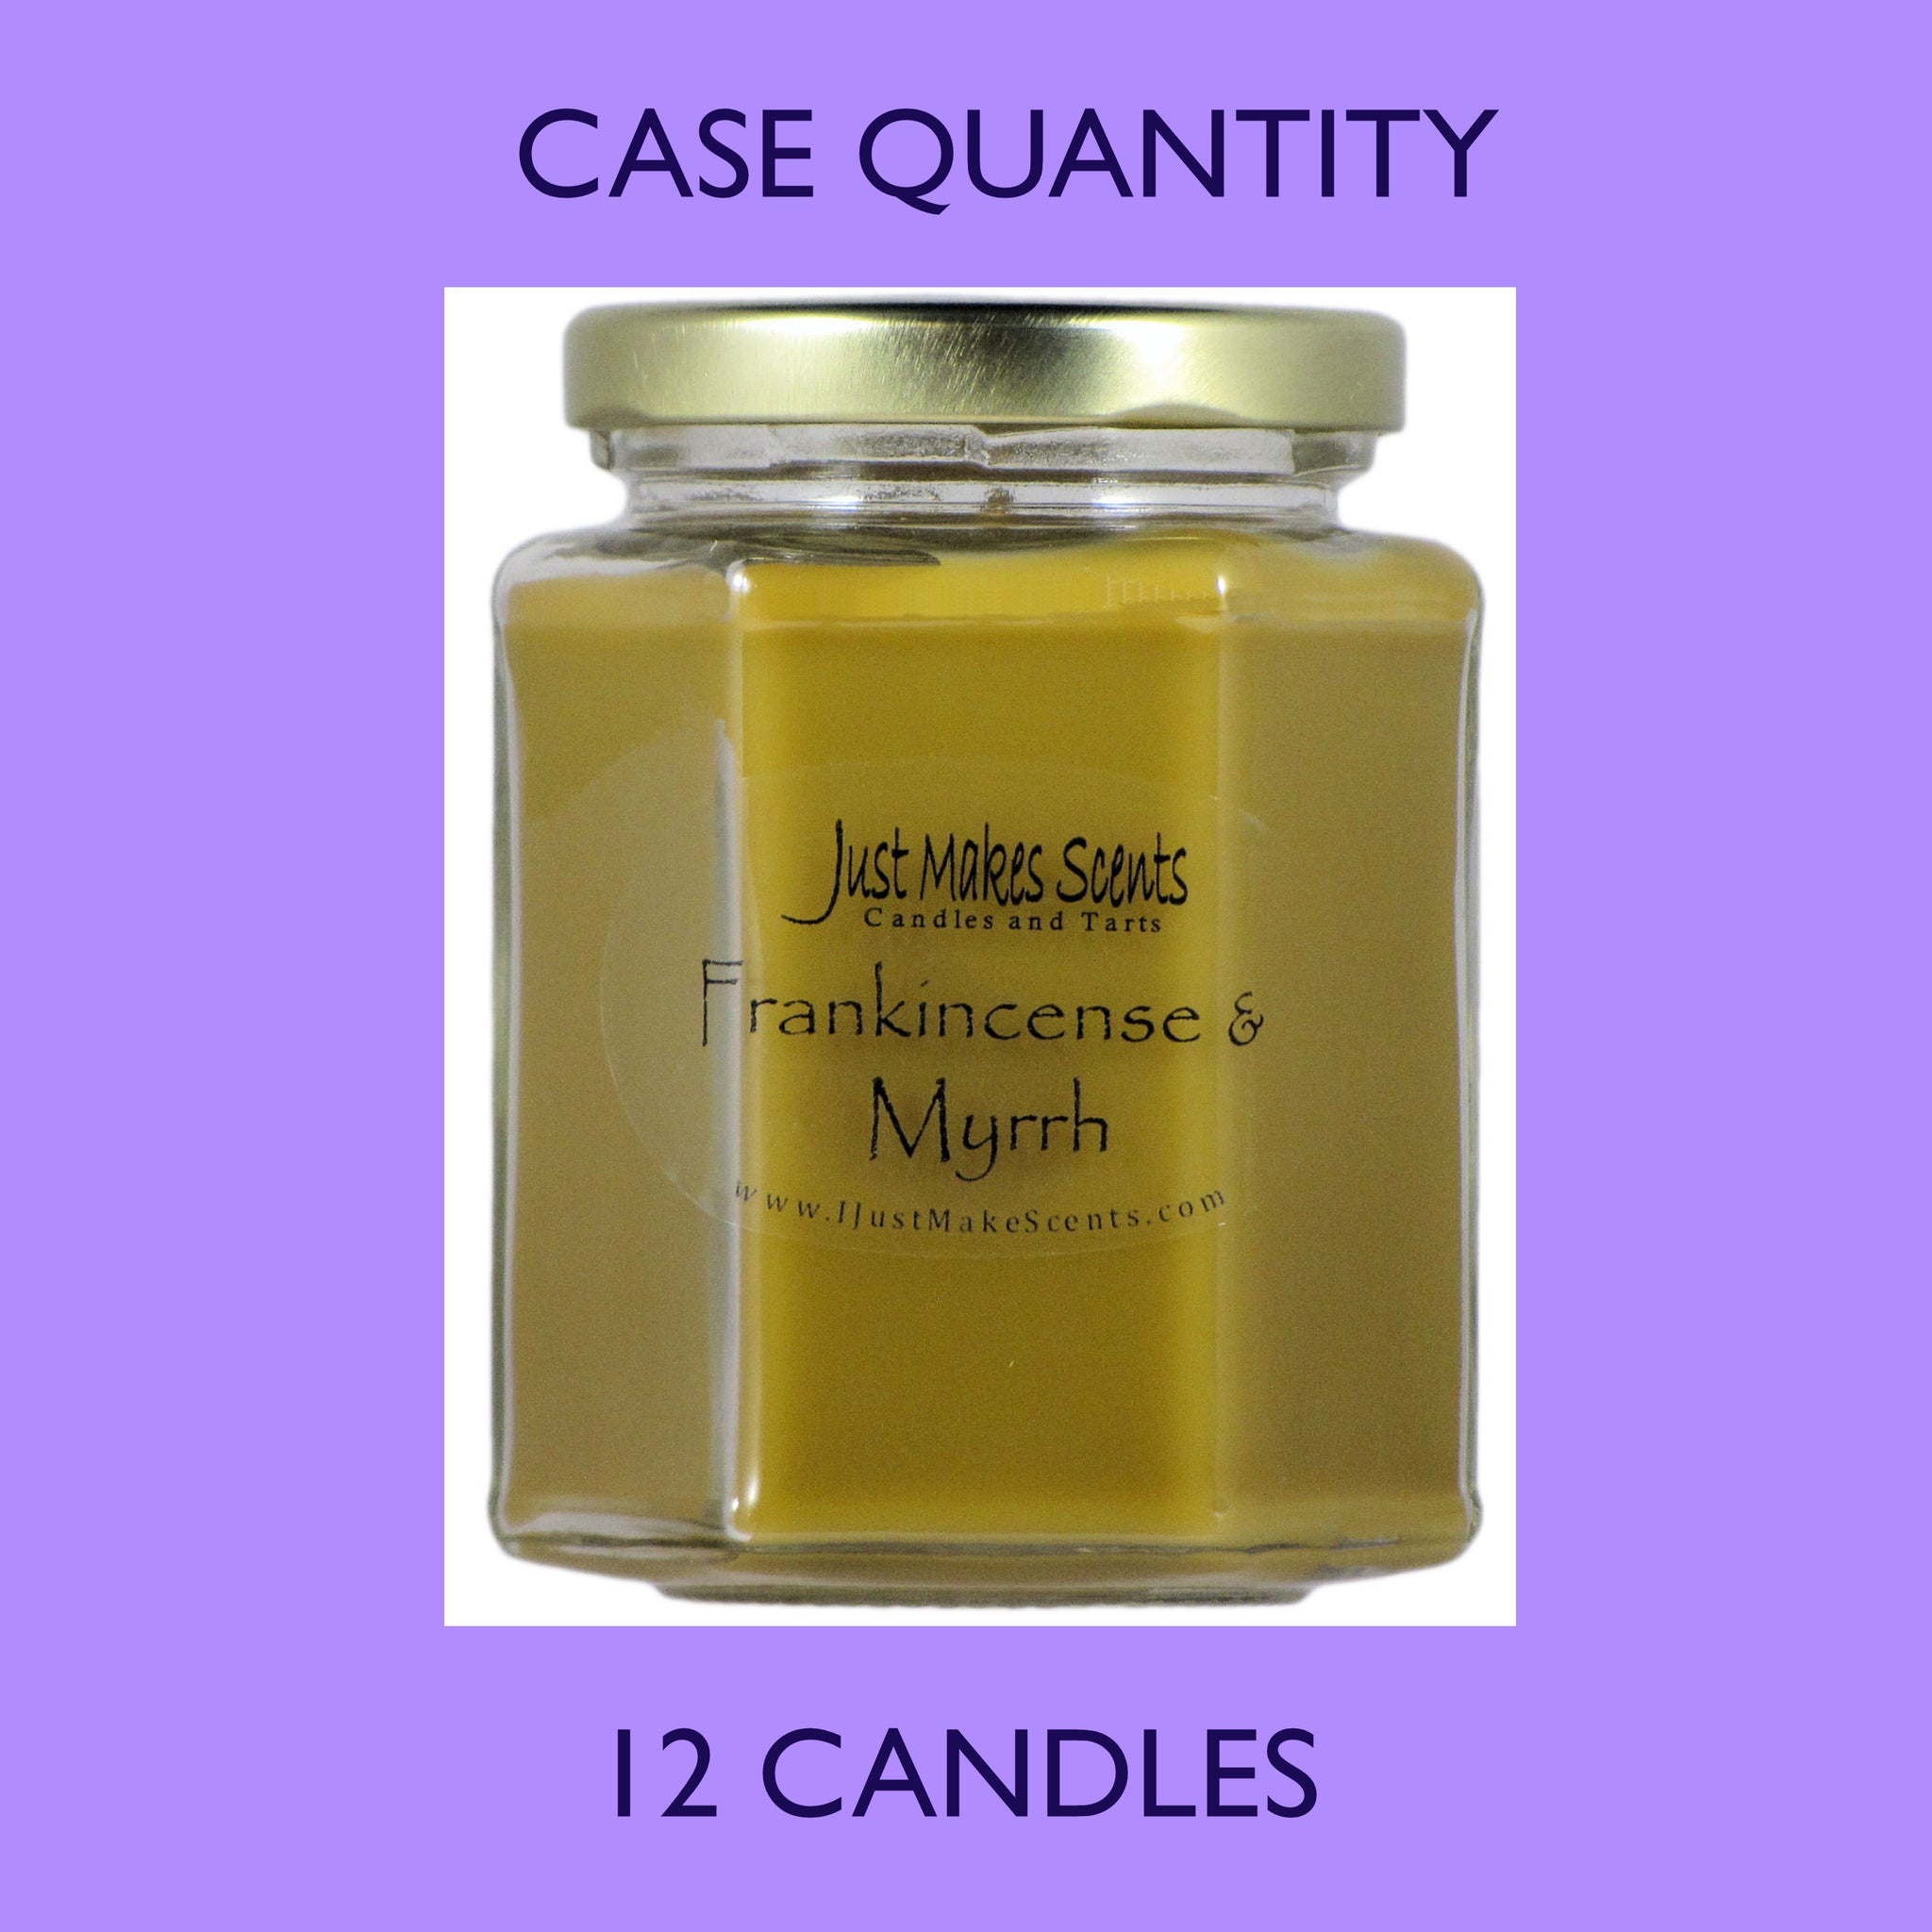 Star Candle Frankincense & Myrrh Scented Stress Relief Candle